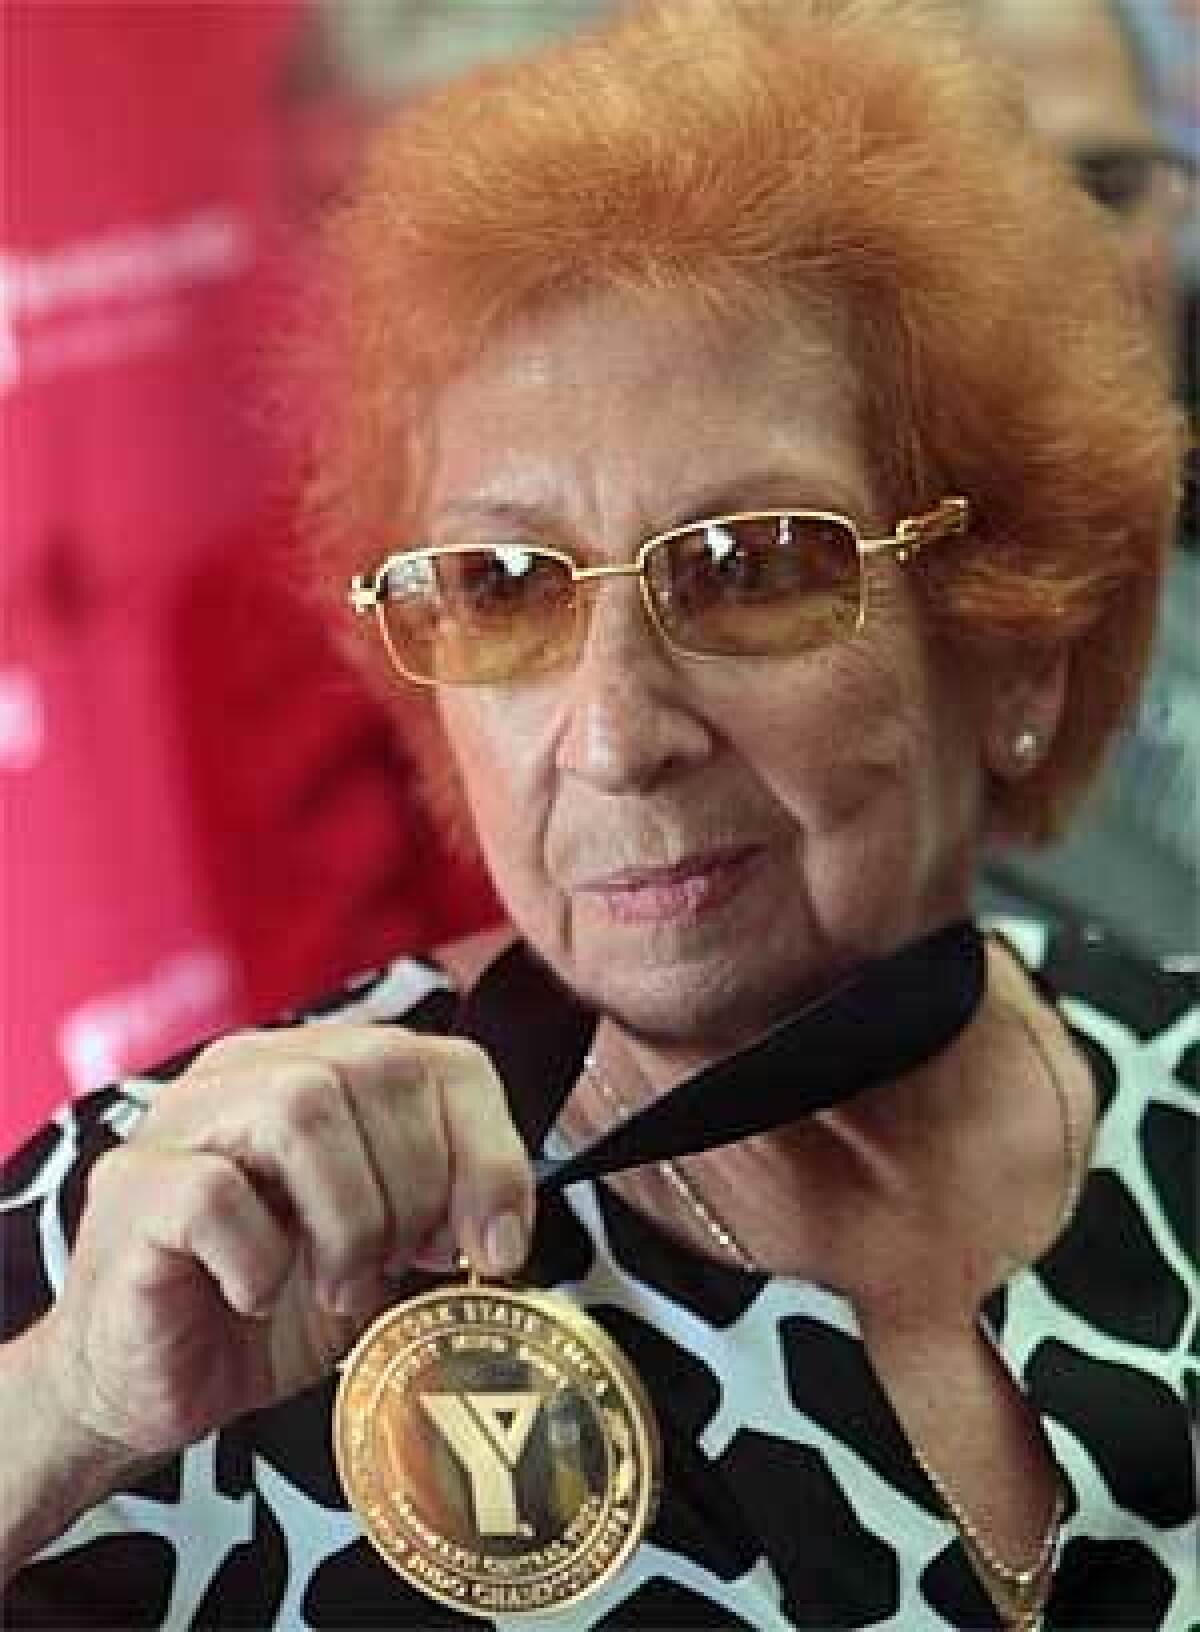 Kanokogi shows her gold medal for the 1959 New York State YMCA Judo Championships. Fifty years earlier she was stripped of the gold medal in the competition after judges realized she was a woman fighting against men.